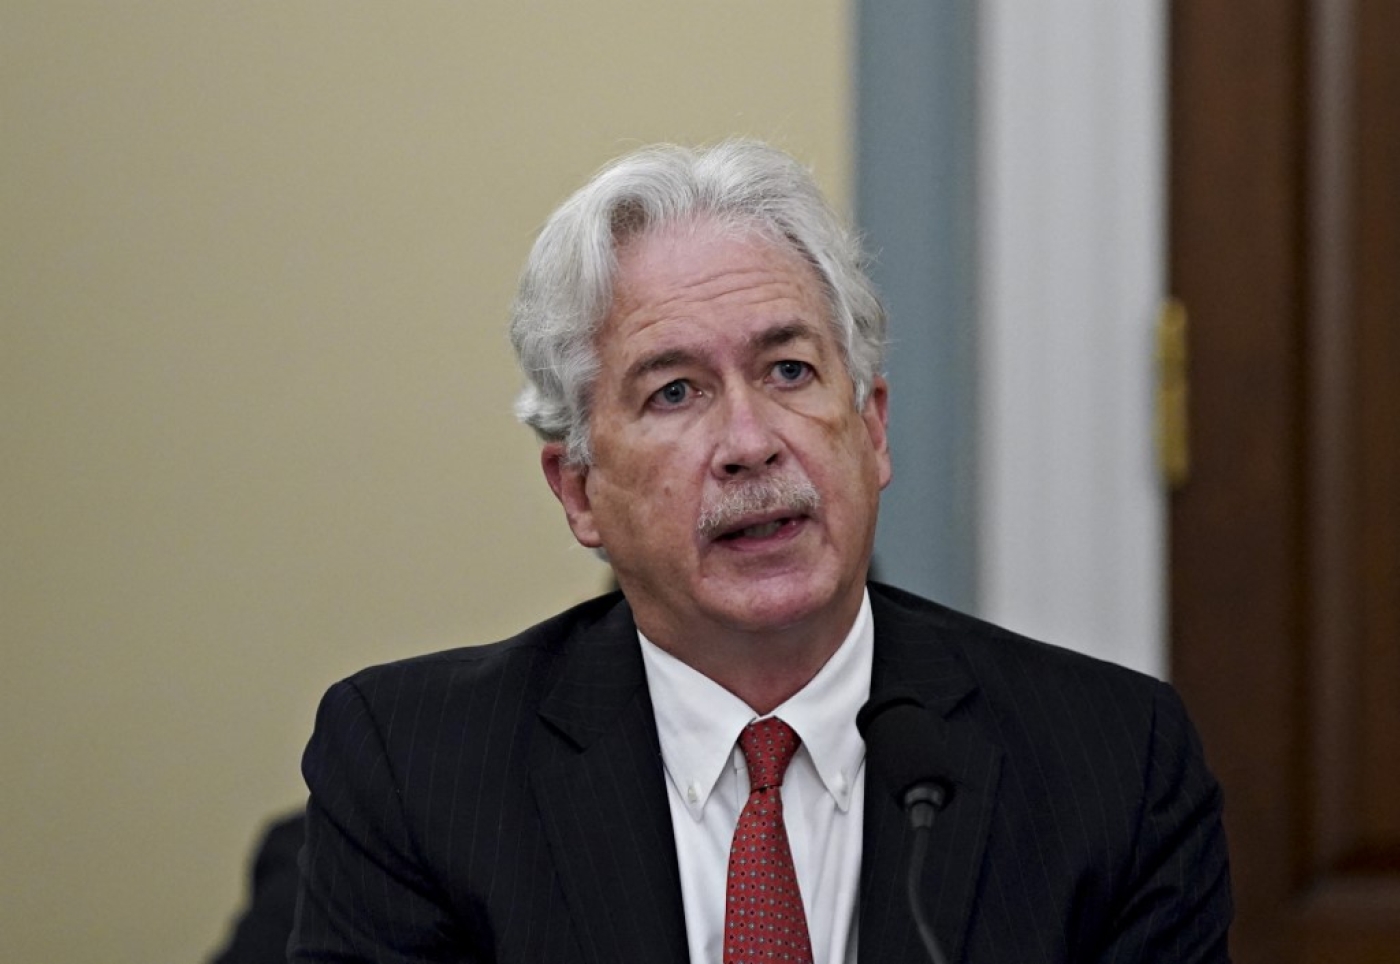 CIA Director, William Burns, testifies during a House Intelligence Committee hearing in Washington on 15 April 2021.